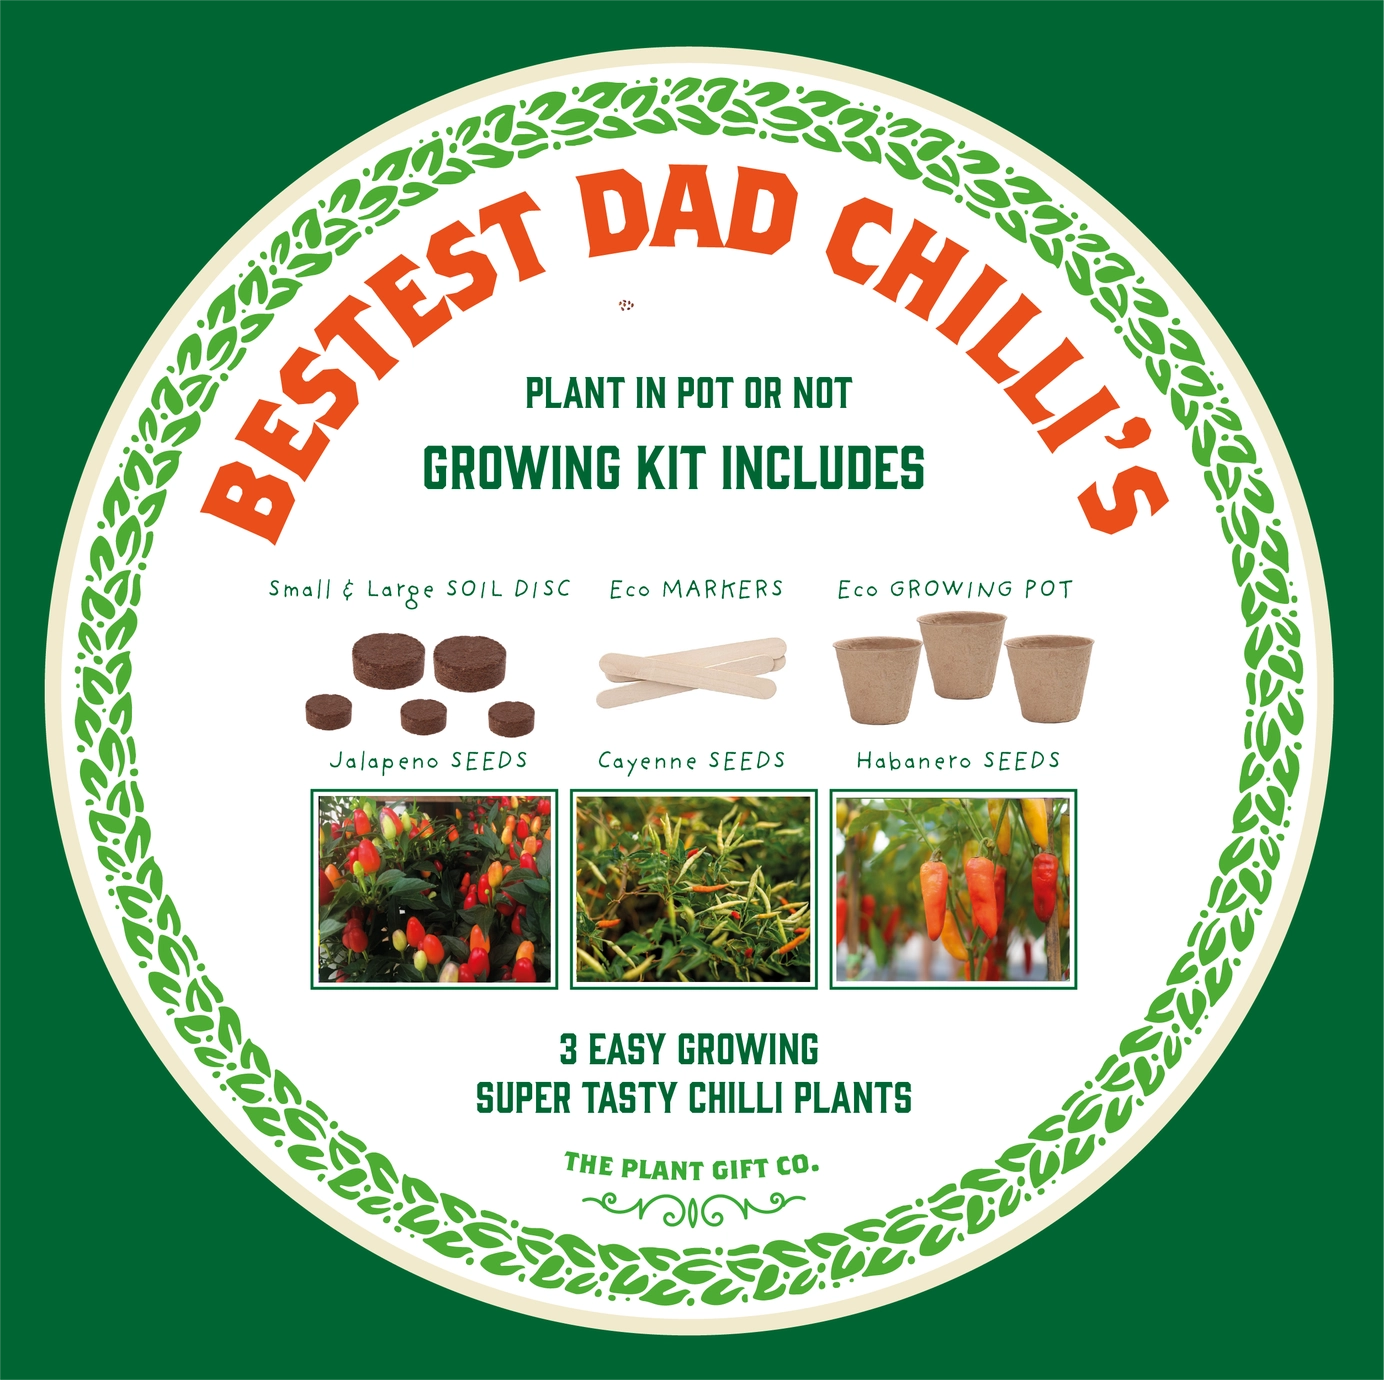 Number 1 Dad - grow your own chilli plants kit